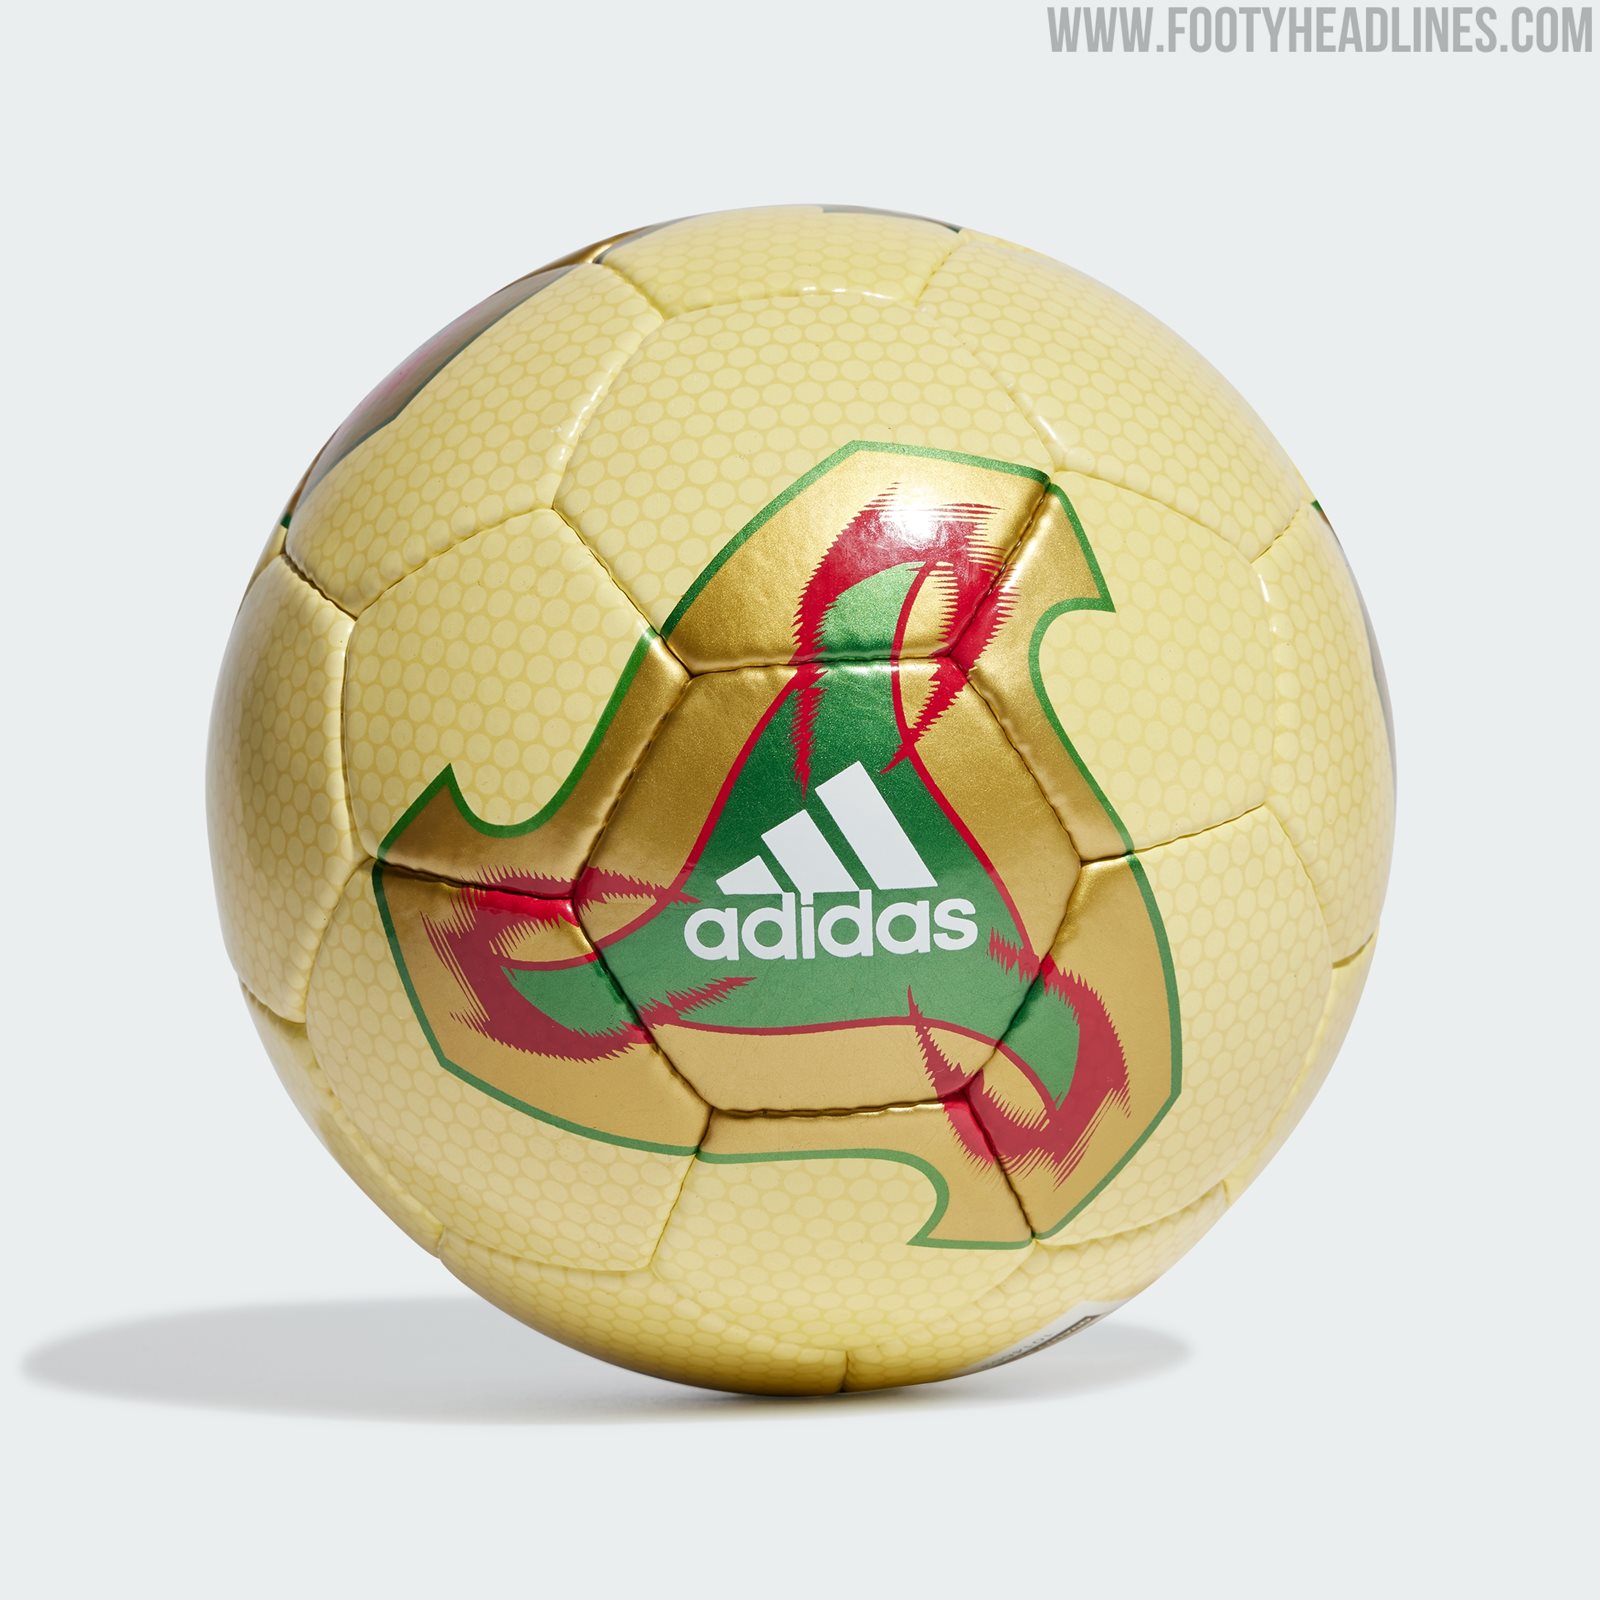 Adidas Fevernova 2002 World Cup Ball Re-Released - Footy Headlines